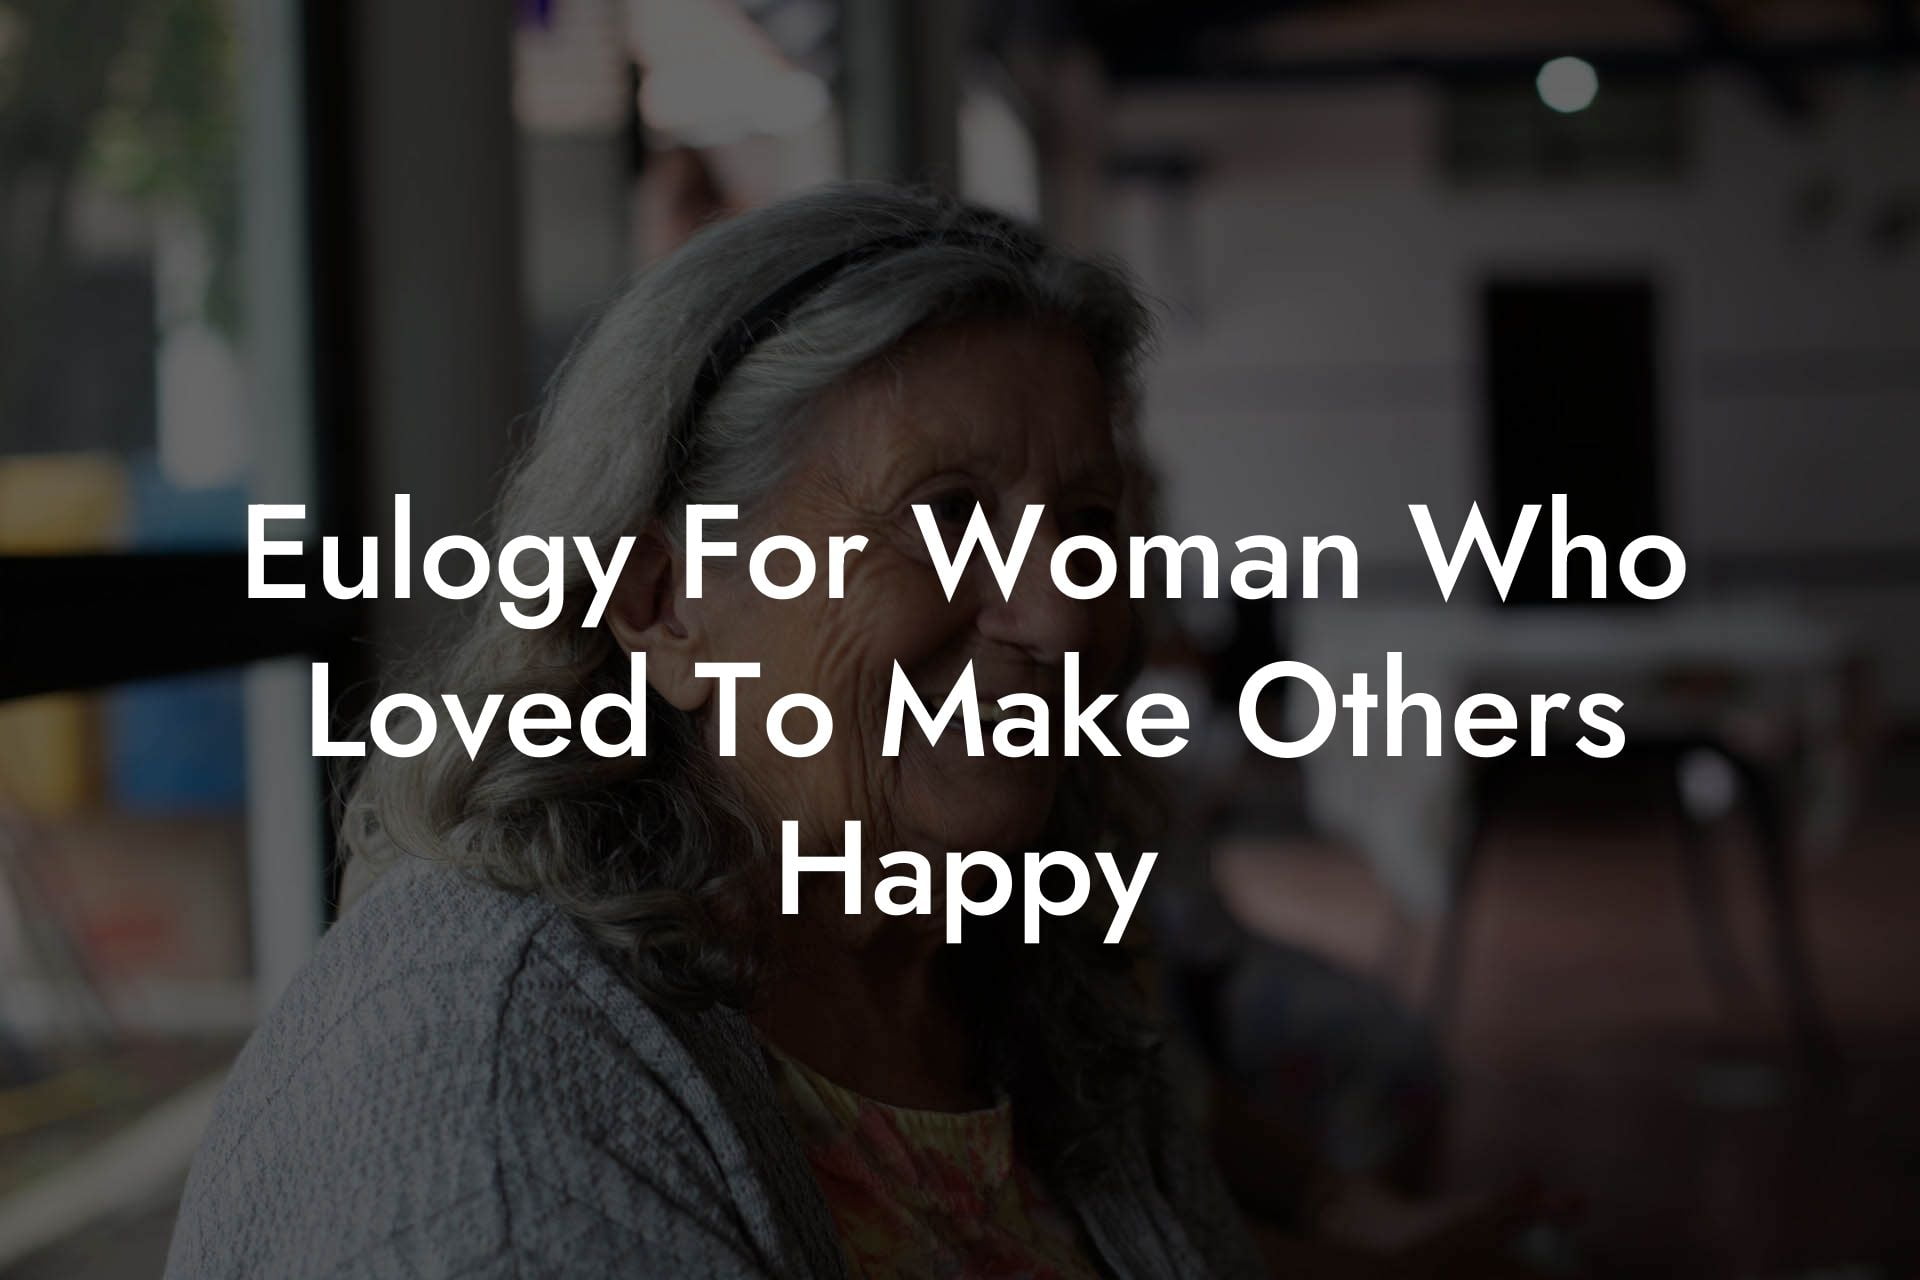 Eulogy For Woman Who Loved To Make Others Happy